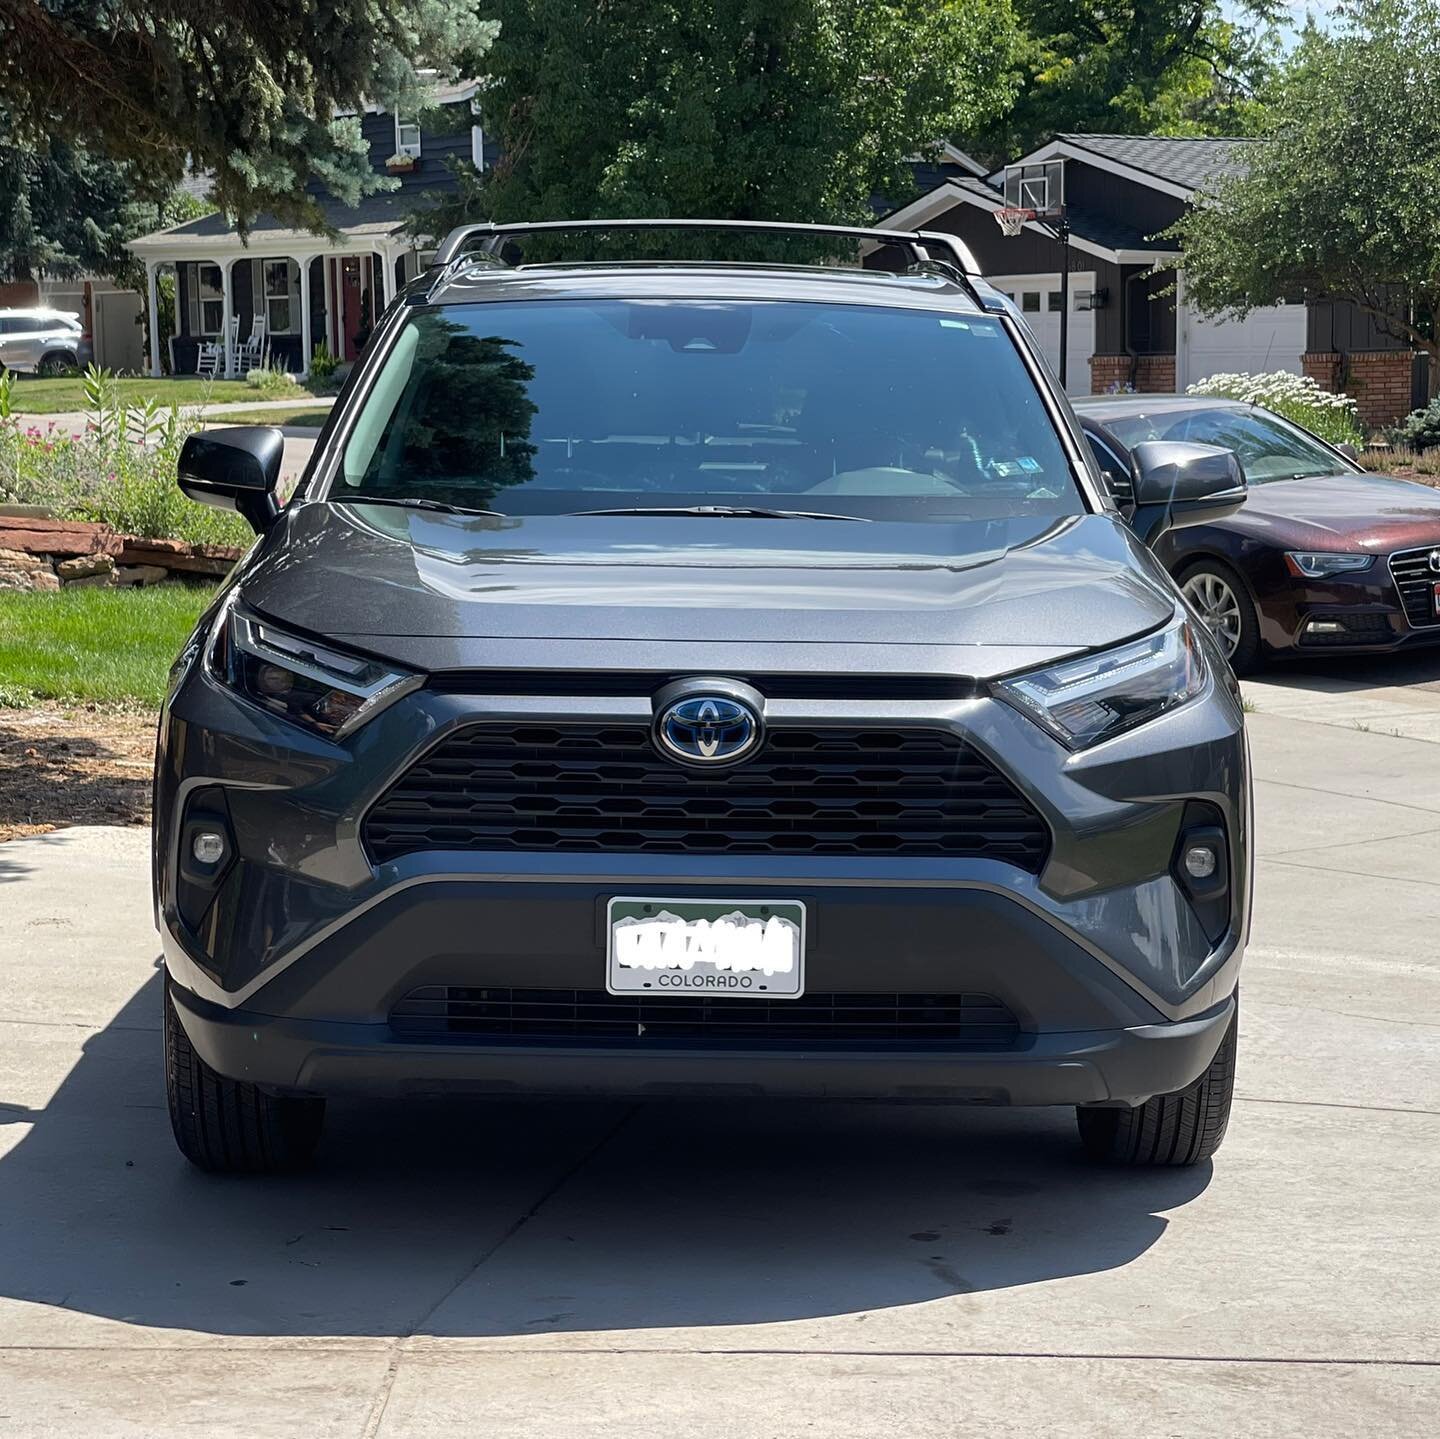 These new Rav-4&rsquo;s are actually pretty nice!